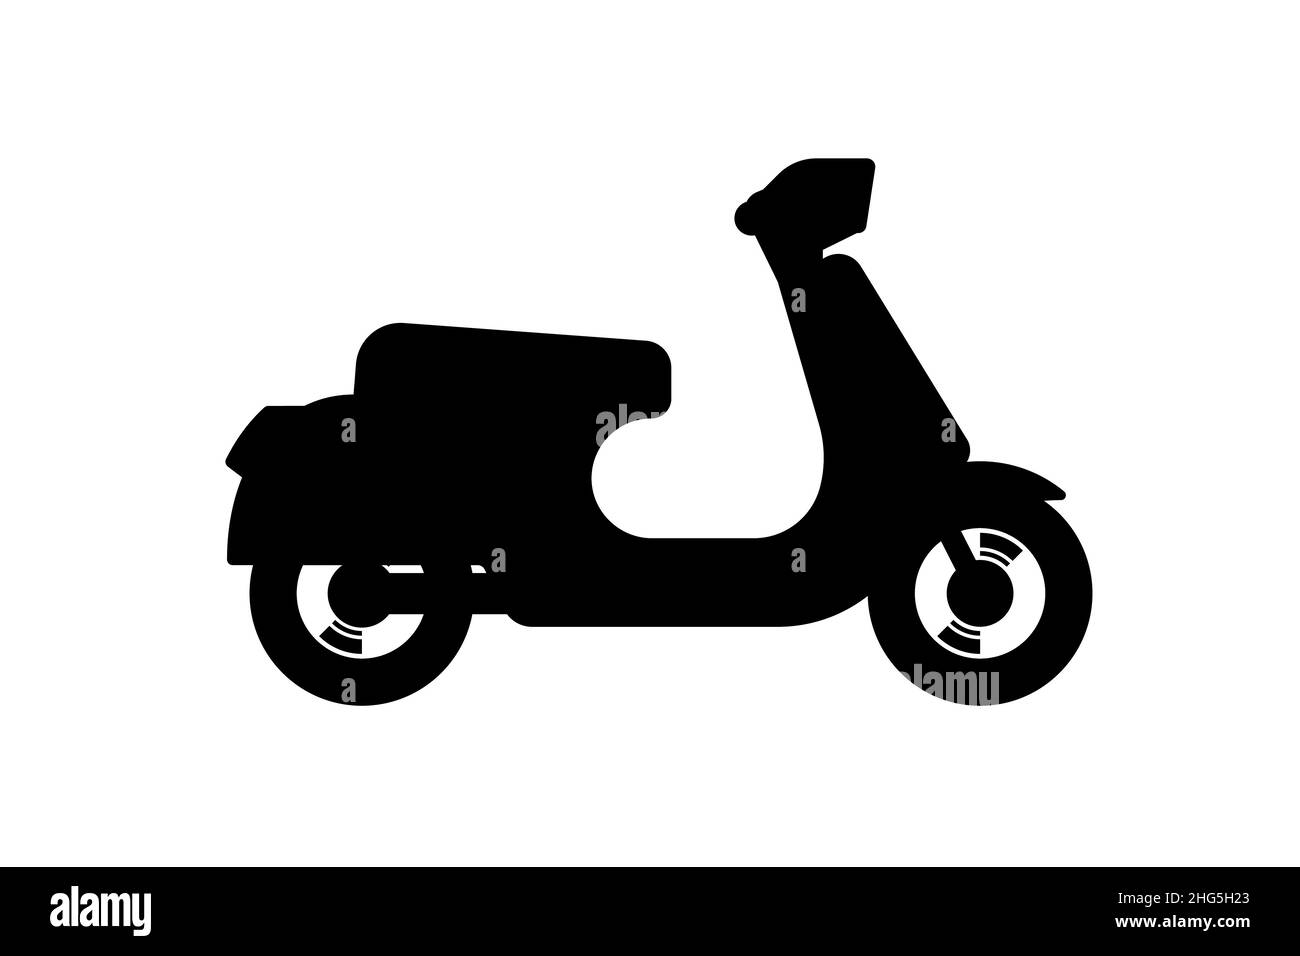 Retro motor scooter black icon. Traditional recreational motorcycle transport road sign. Moped delivery symbol. Vintage motorbike vector eps illustration isolated on white background Stock Vector